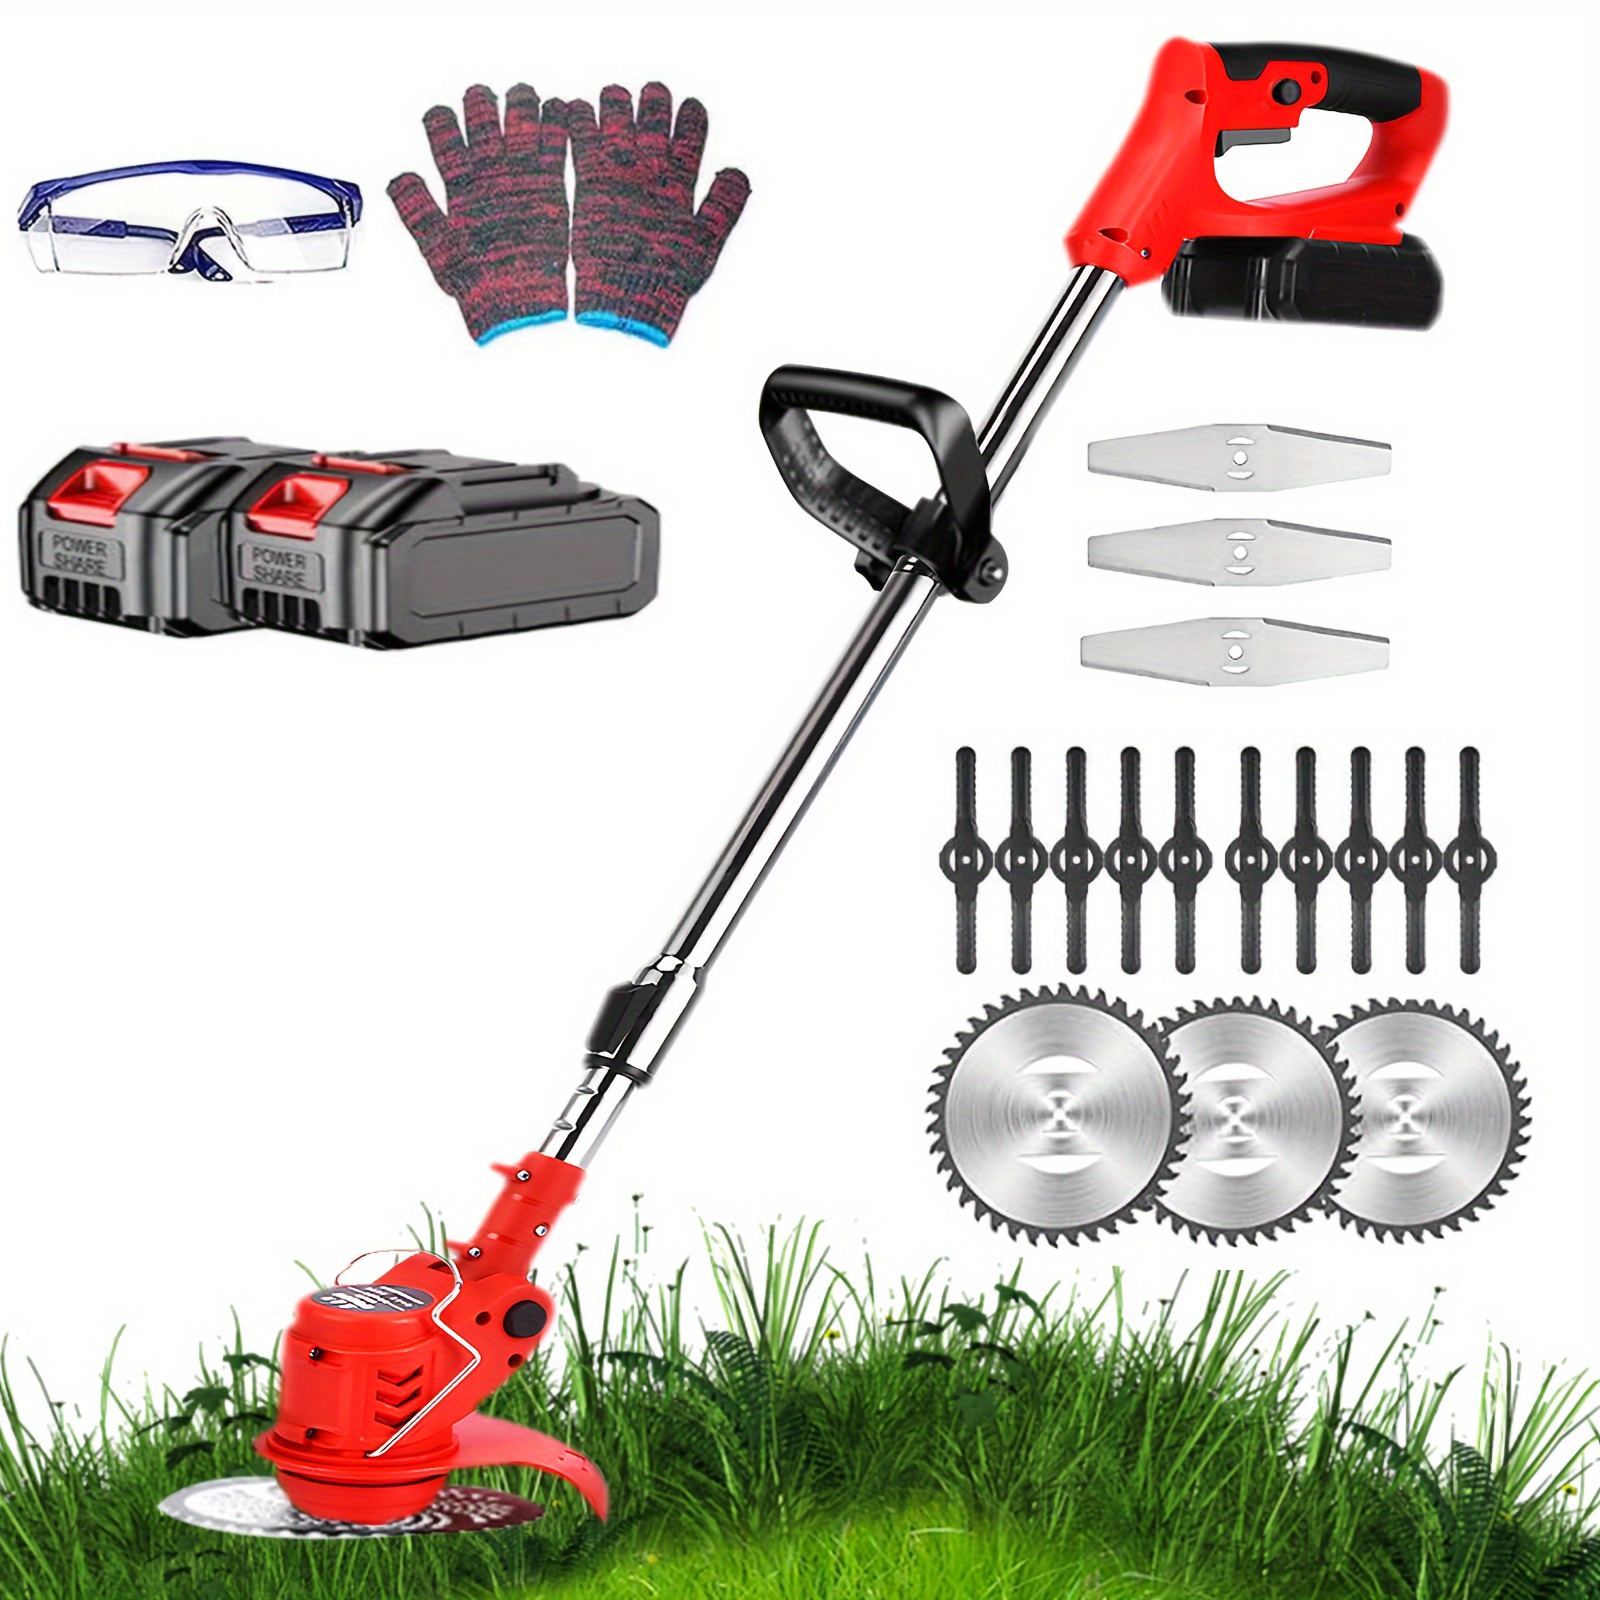 

Lawn Mower, Weeder, Cordless Lawn Trimmer, 3-in-1 Multi-function Lawn Trimmer, Lawn Trimmer Mower For Lawn Care, Suitable For Yard And Garden, Shrubs Around Patio